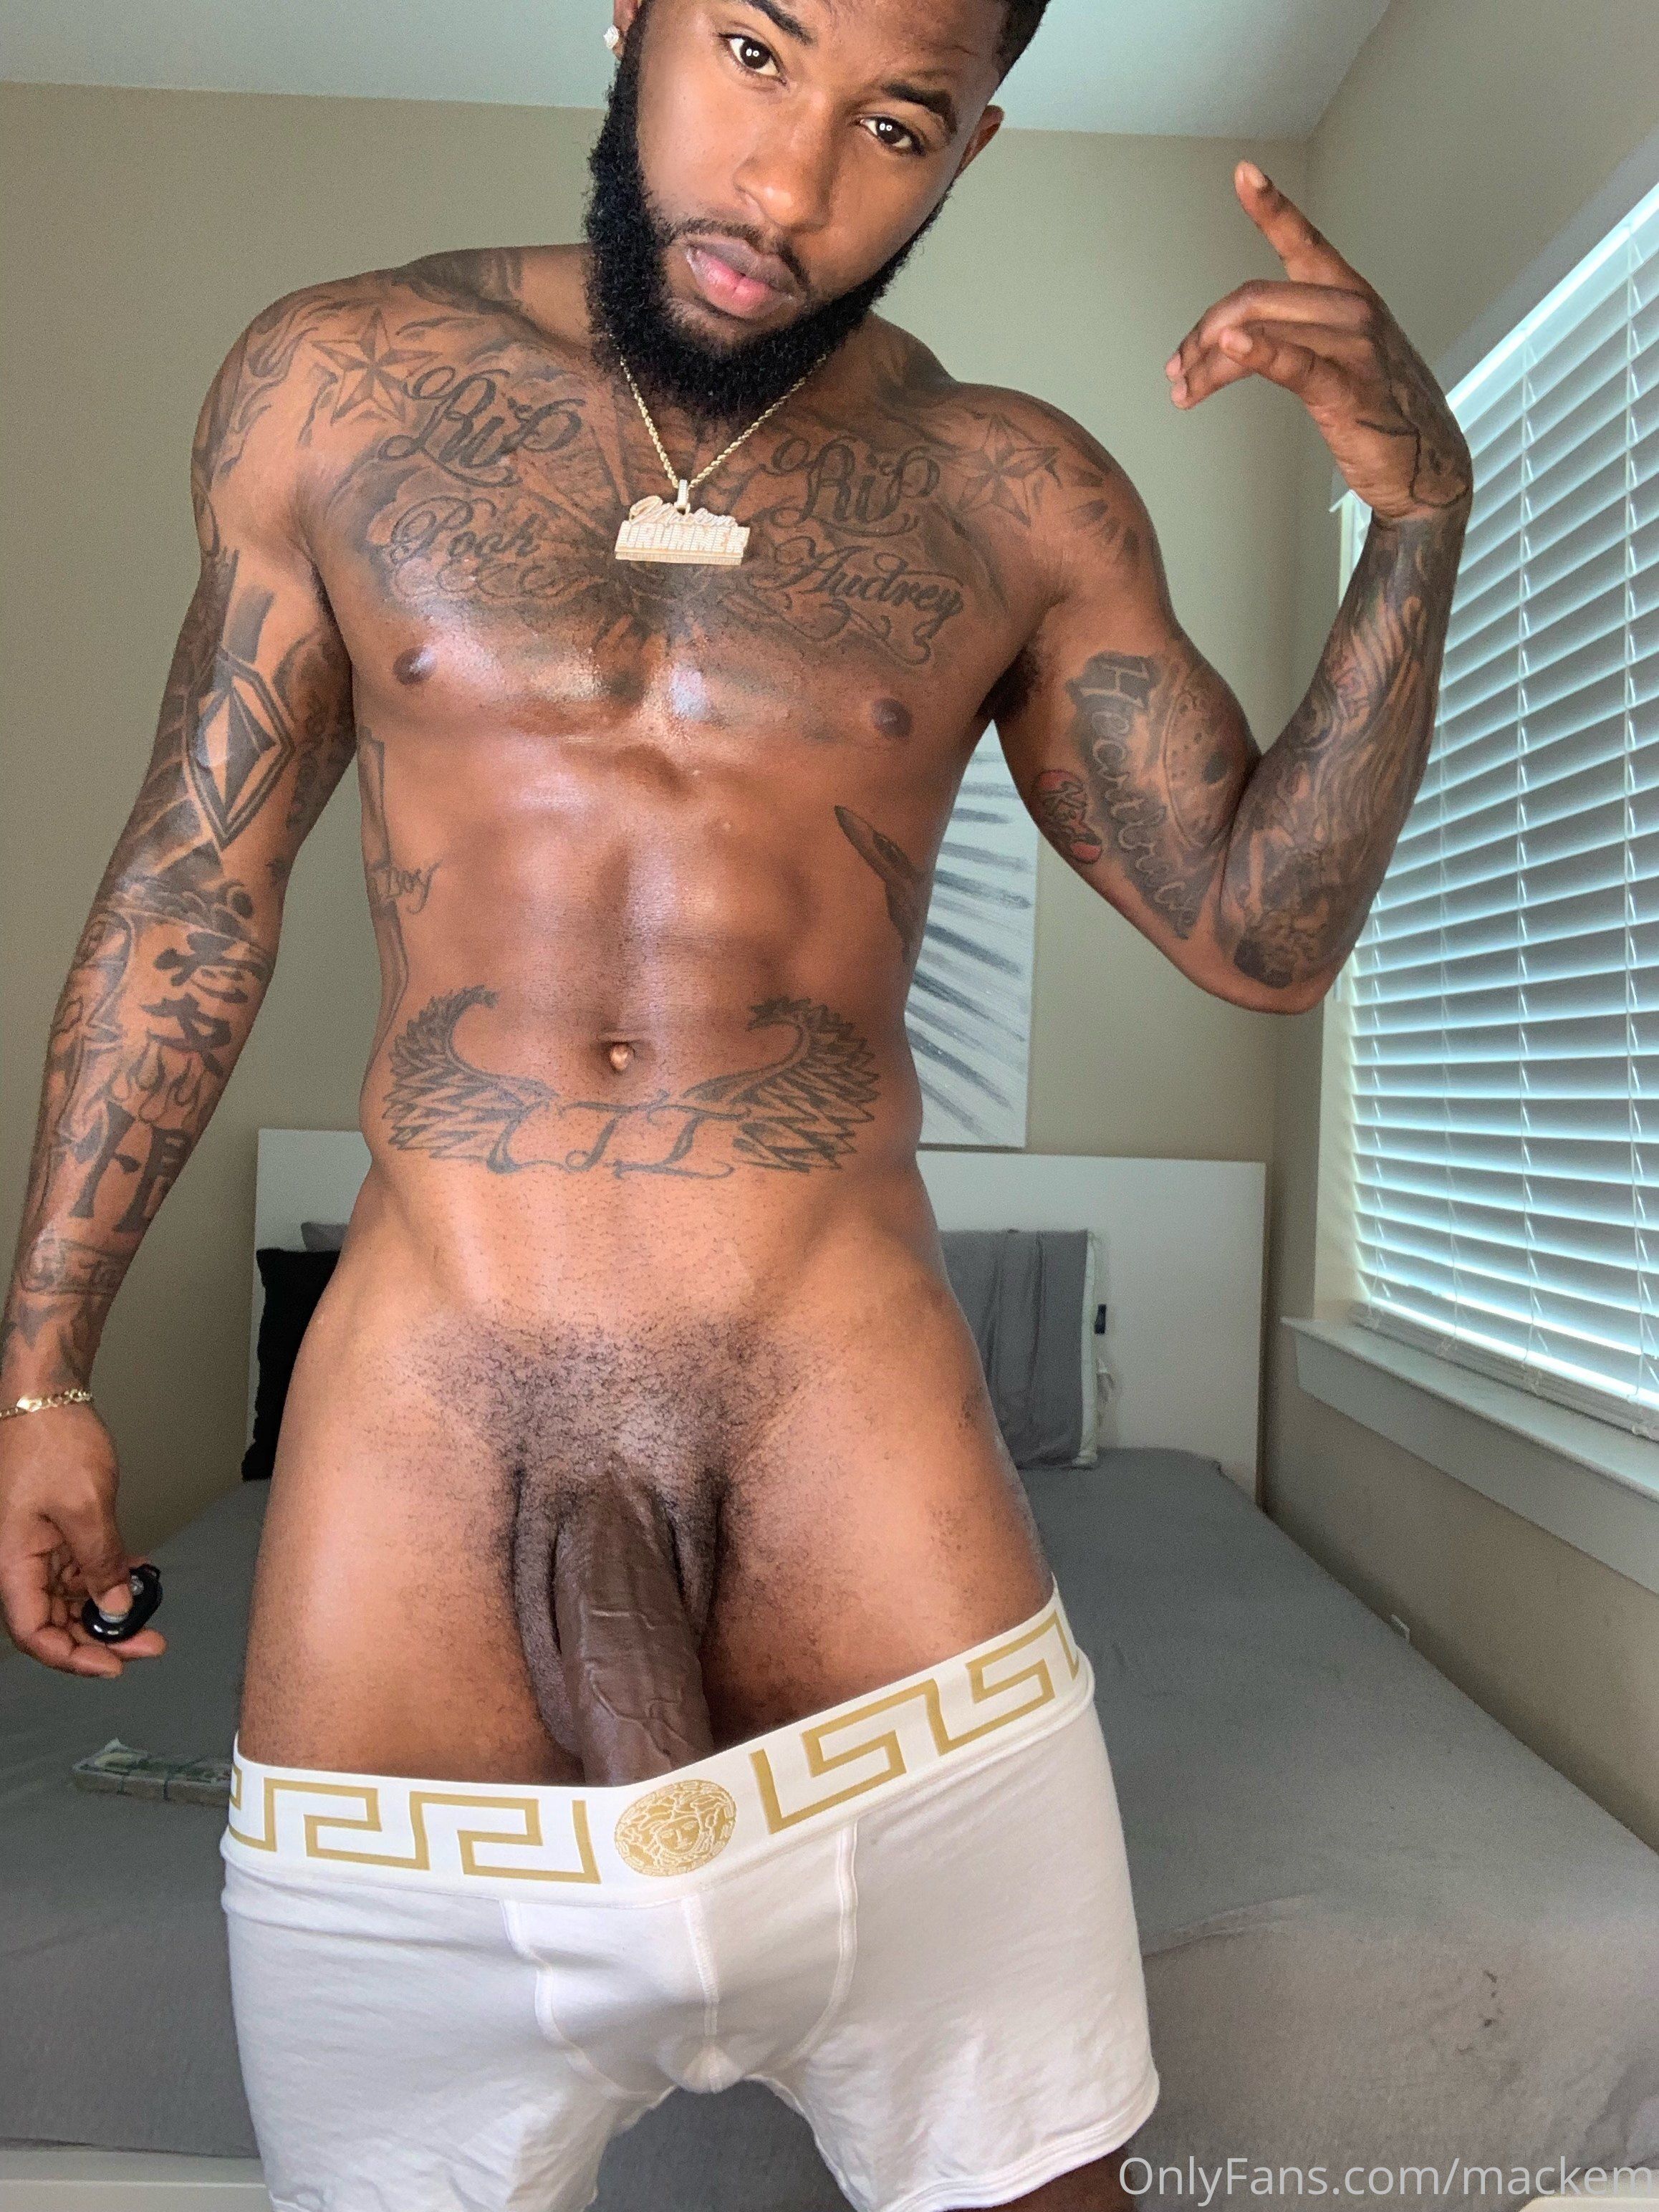 Malcolm Drummer - MTV Reality Star Onlyfans.